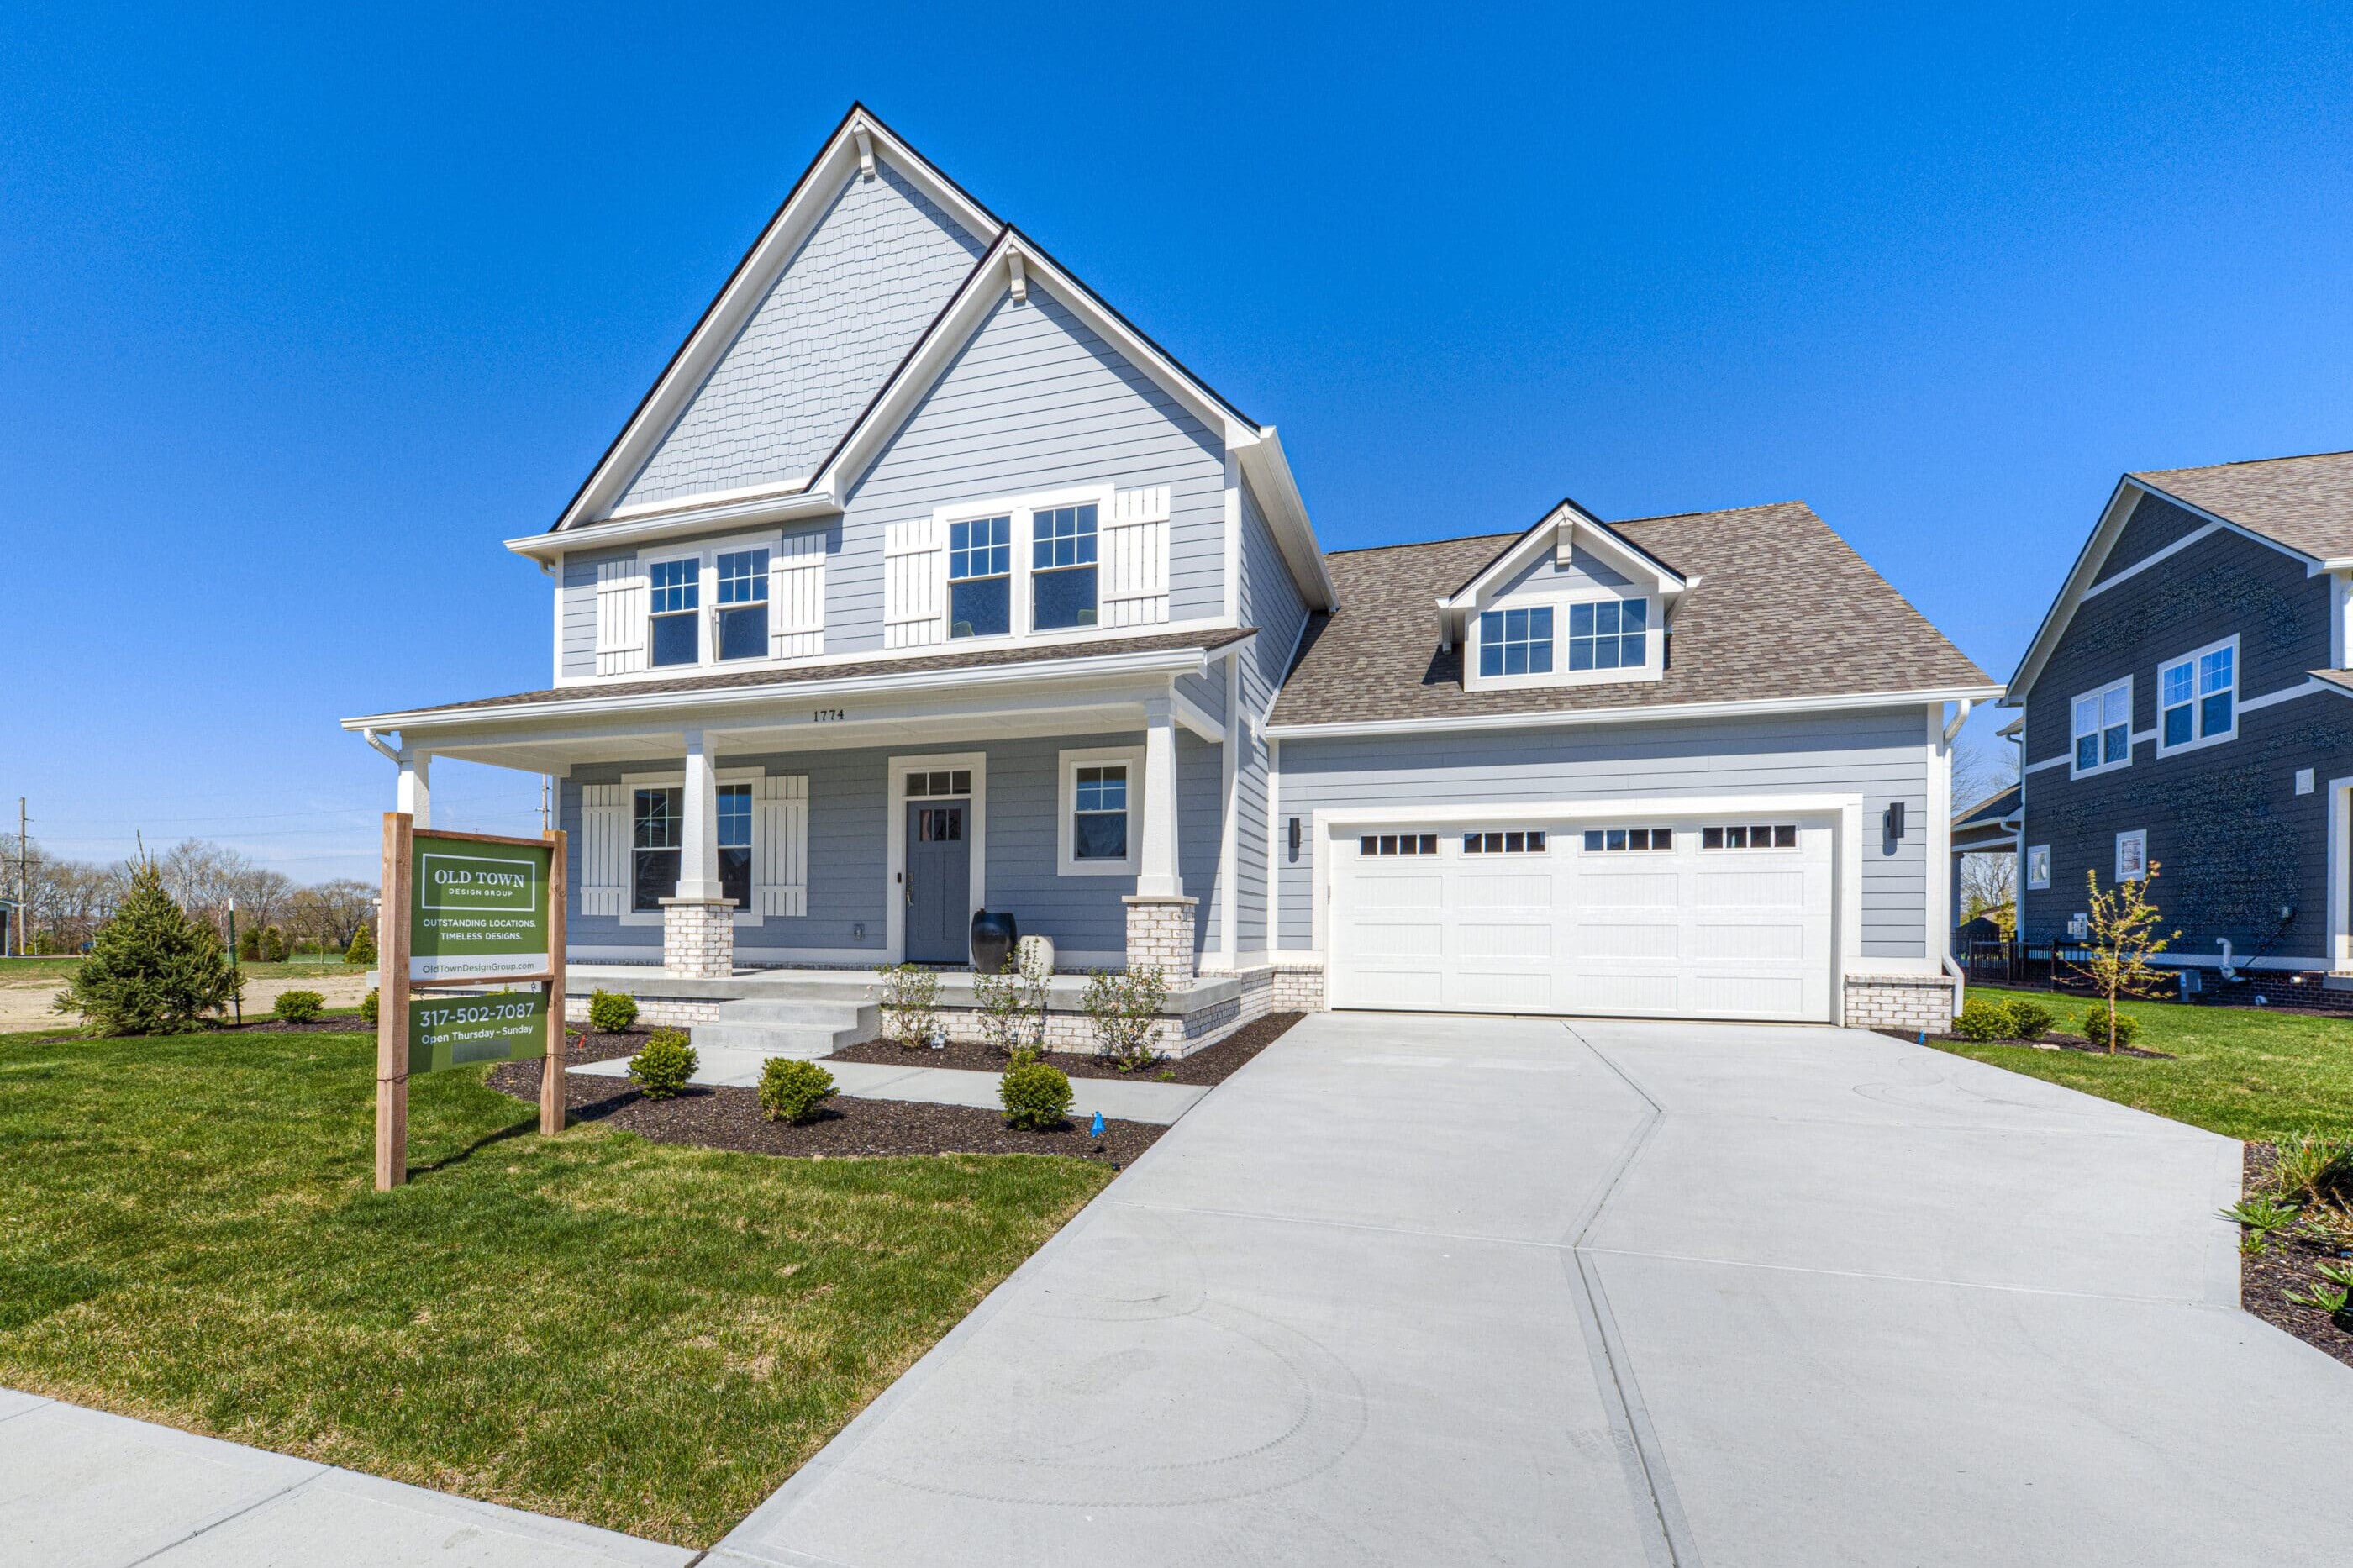 Keywords: Luxury custom home builder Westfield Indiana. 

Description: A two story luxury custom home with a garage and driveway, built by a premier custom home builder in Westfield, Indiana.